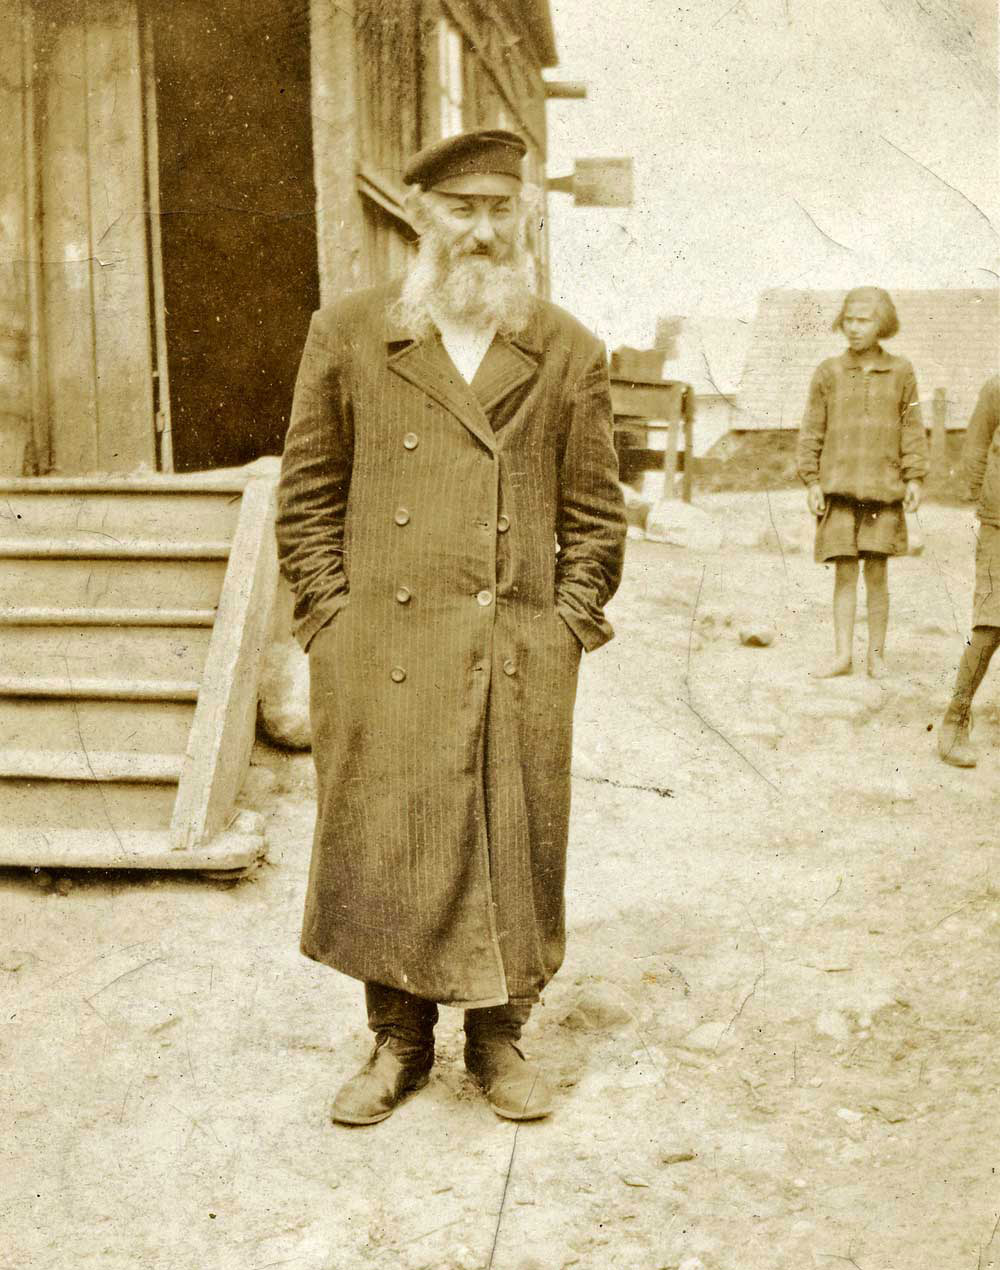 This image was found among a collection of family photos, with the caption "Grandfather Russia 1921."  Possibly taken in Grodno (now called Hrudna), in Belarus. On the back of the photo is written a free-verse poem:


I want so much, yet
   I live so little
Things mean nothing
But God, the wants, the needs
   the hungers
Oft even the shortest life
Are greater than the longest
   death.
Yet we desire, oh Lord, heaven
And receiving earth, are satisfied.

Let me forget fool's advice
And bask in childlike happiness
Yet I am human, and must want
Everything, receiving but percent


I've no idea who wrote the poem.

View full size.